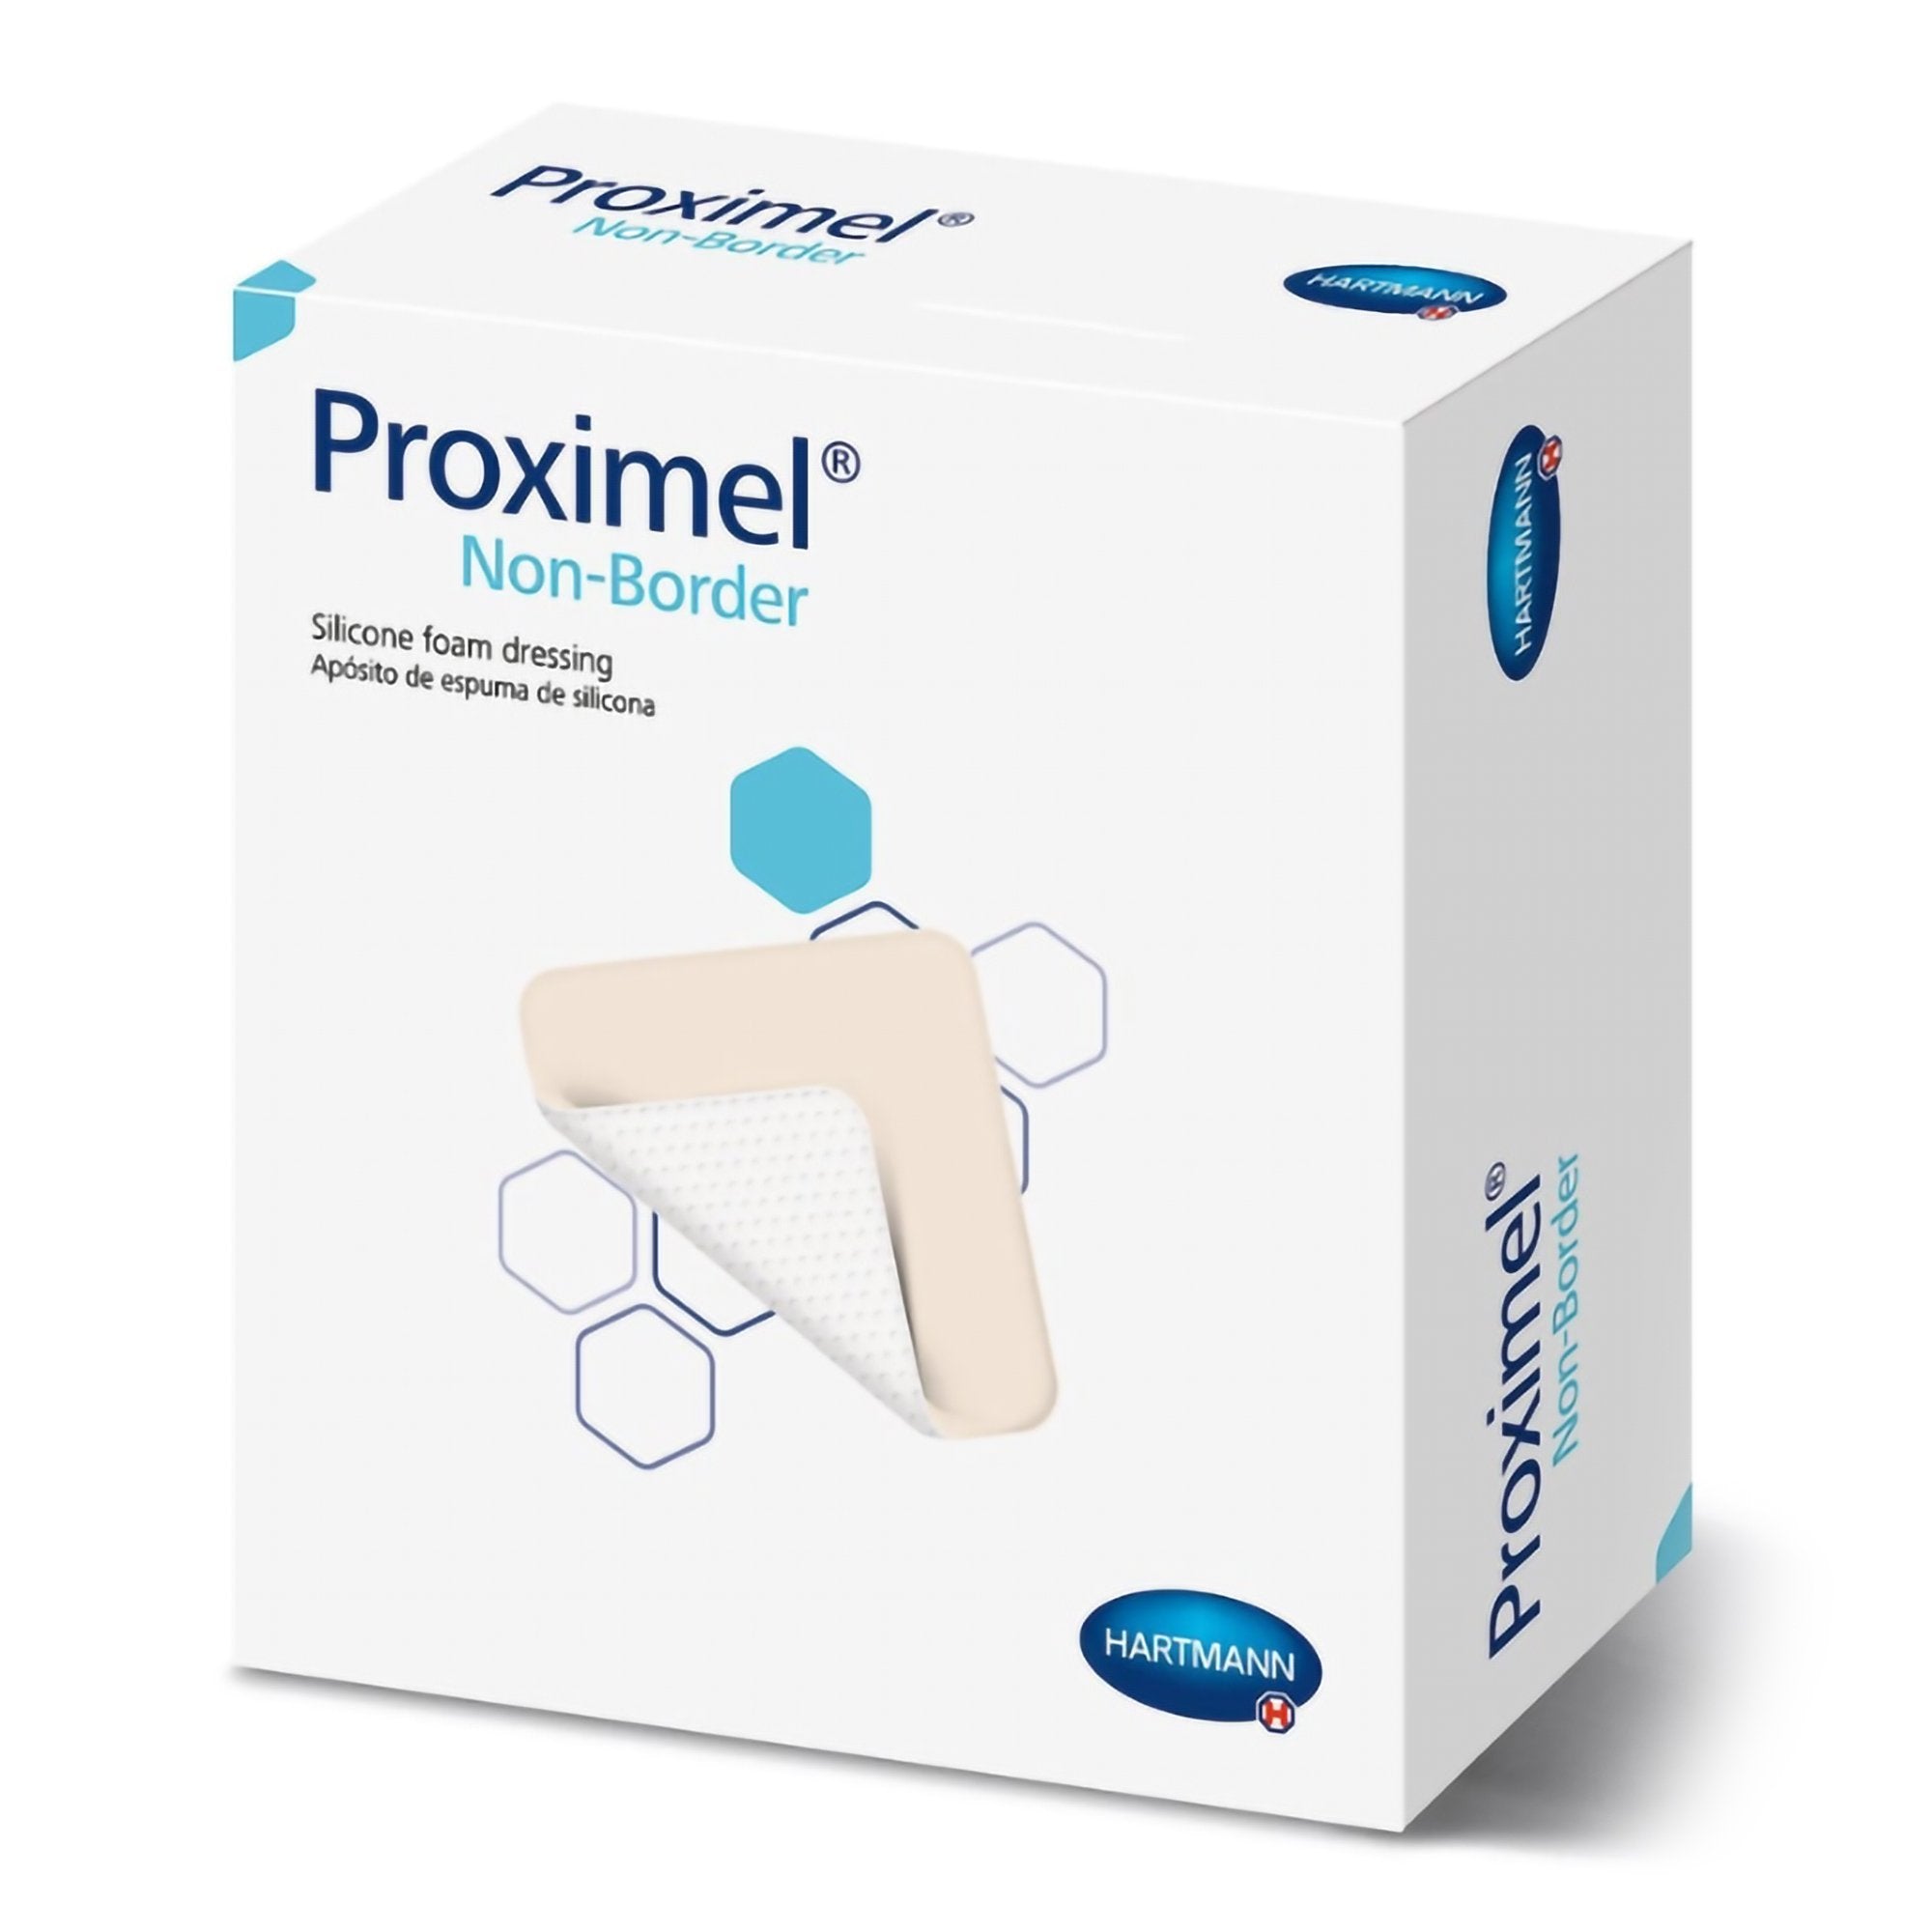 Foam Dressing Proximel® Non-Border 5 X 8 Inch Without Border Waterproof Backing Silicone Face Heel Sterile